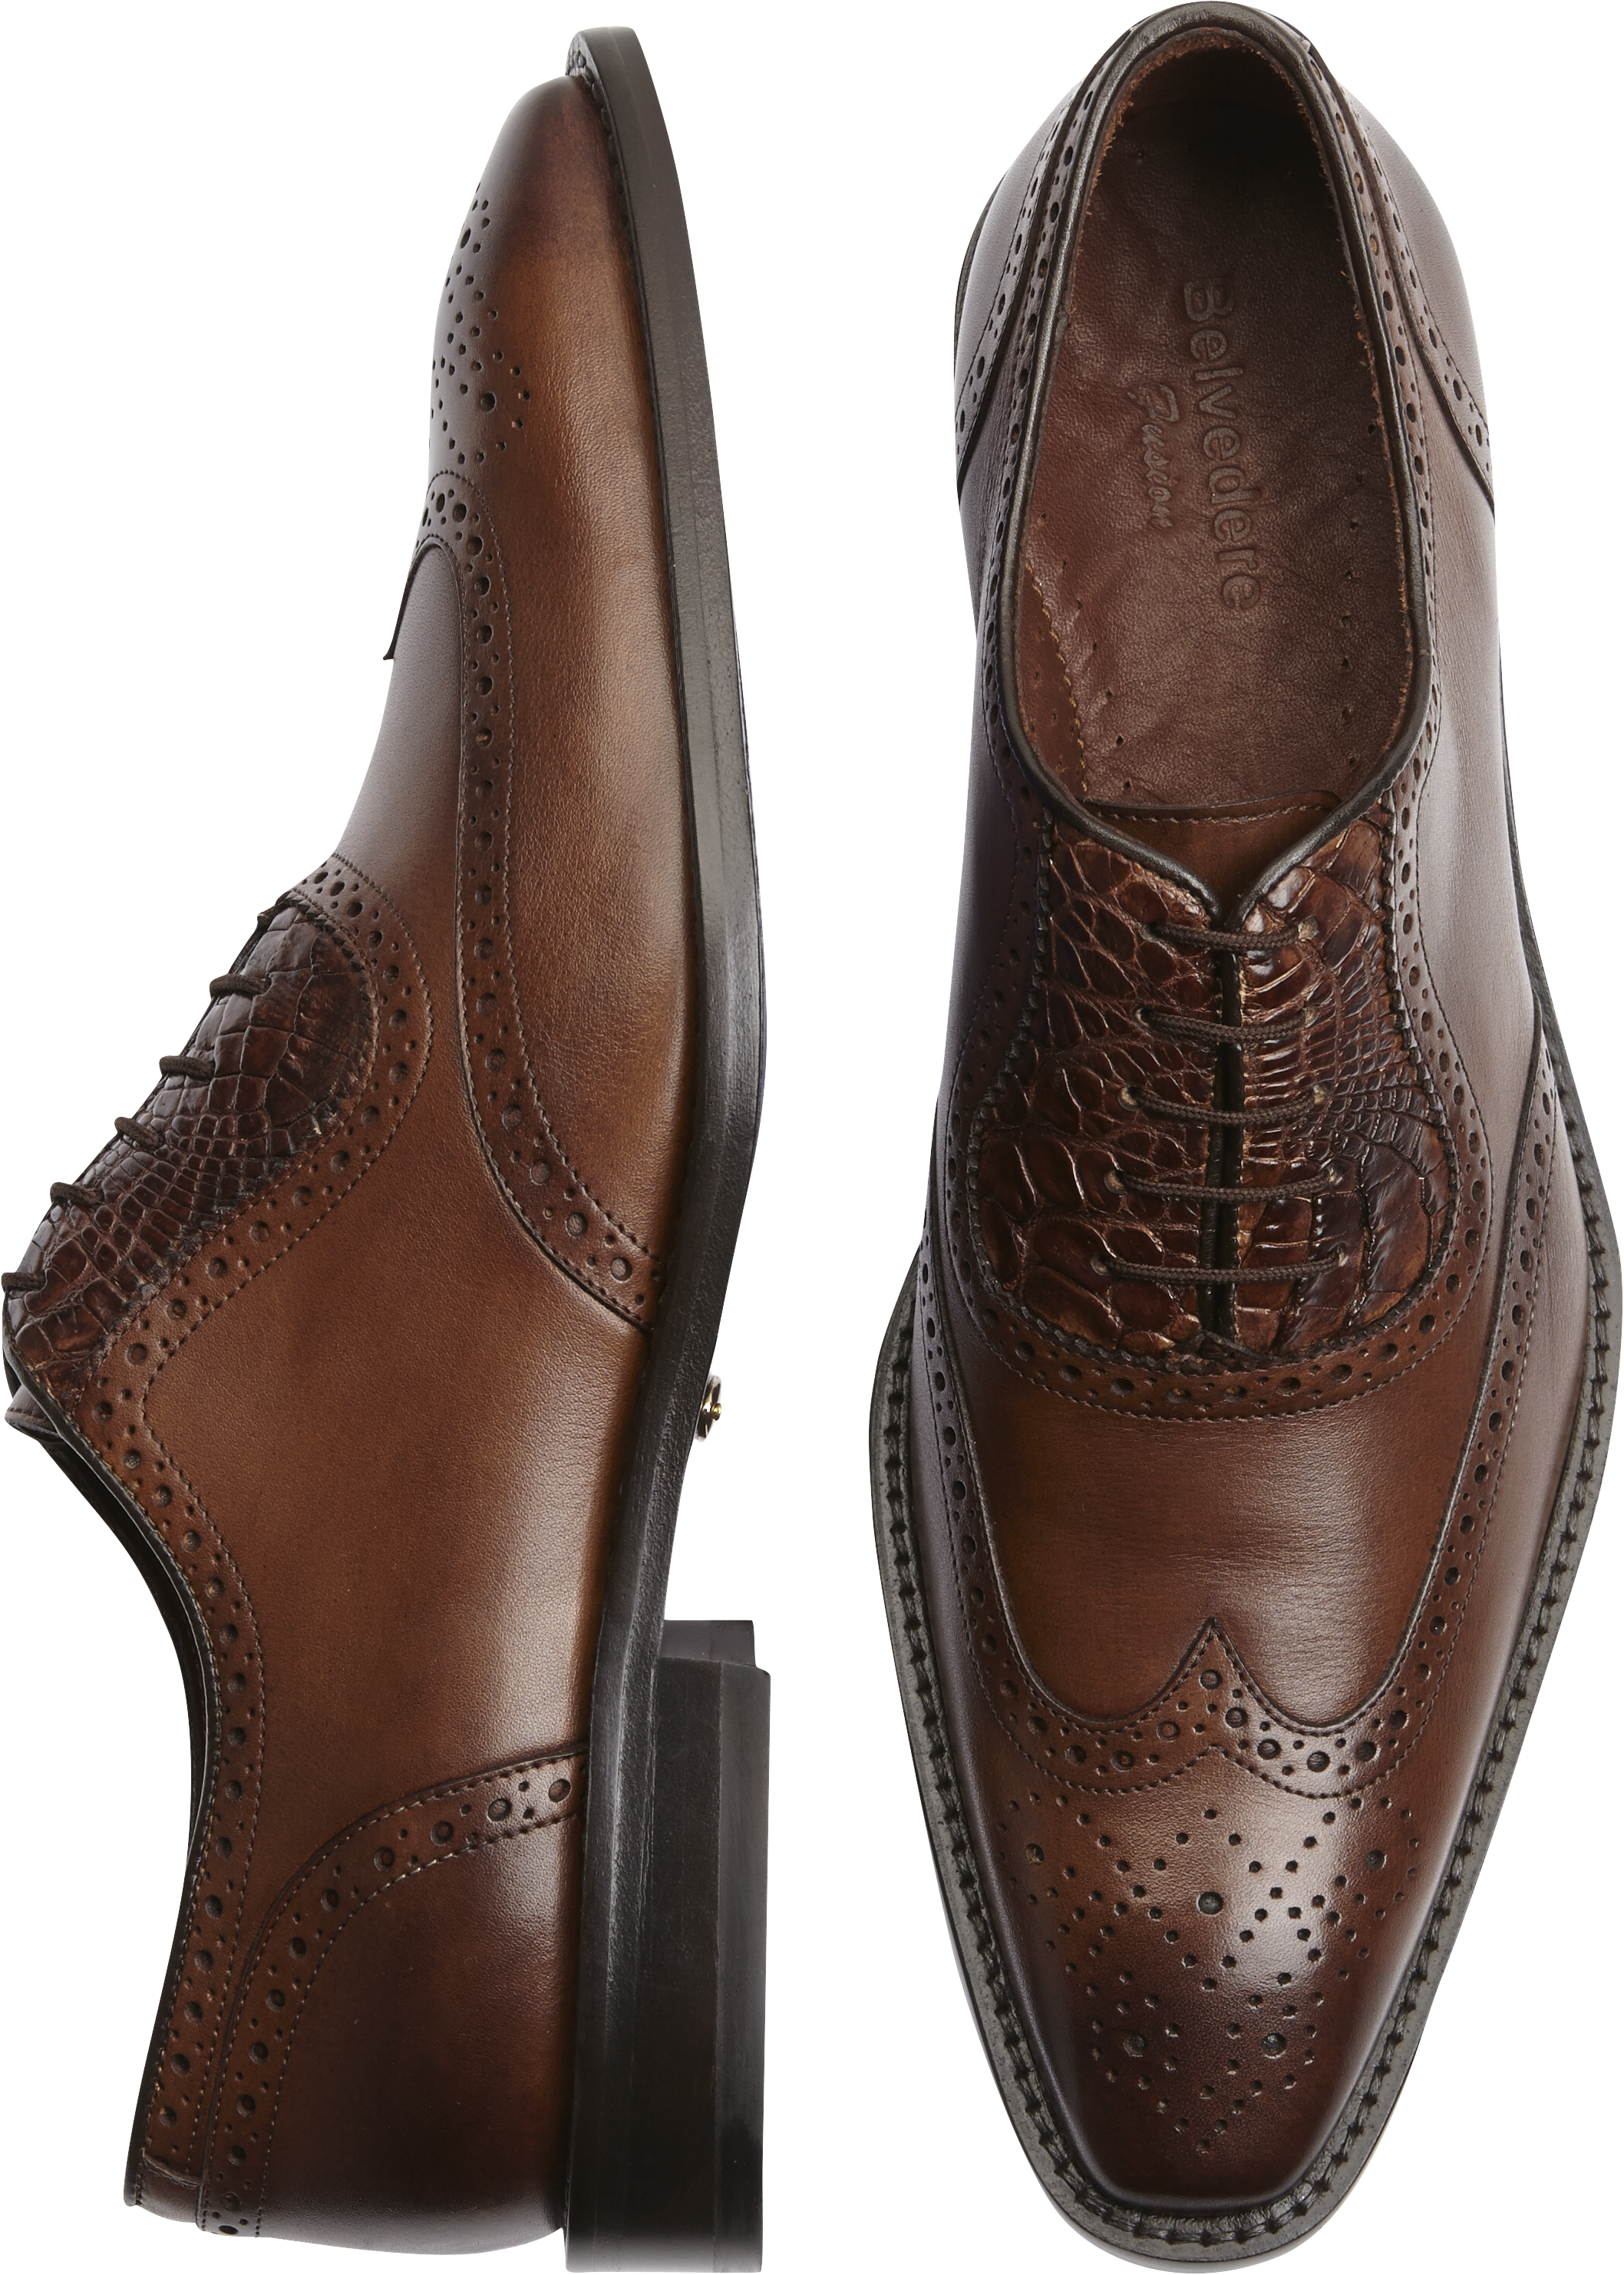 Mens Leather Sole Shoes | Men's Wearhouse | Male Leather Sole Shoes ...